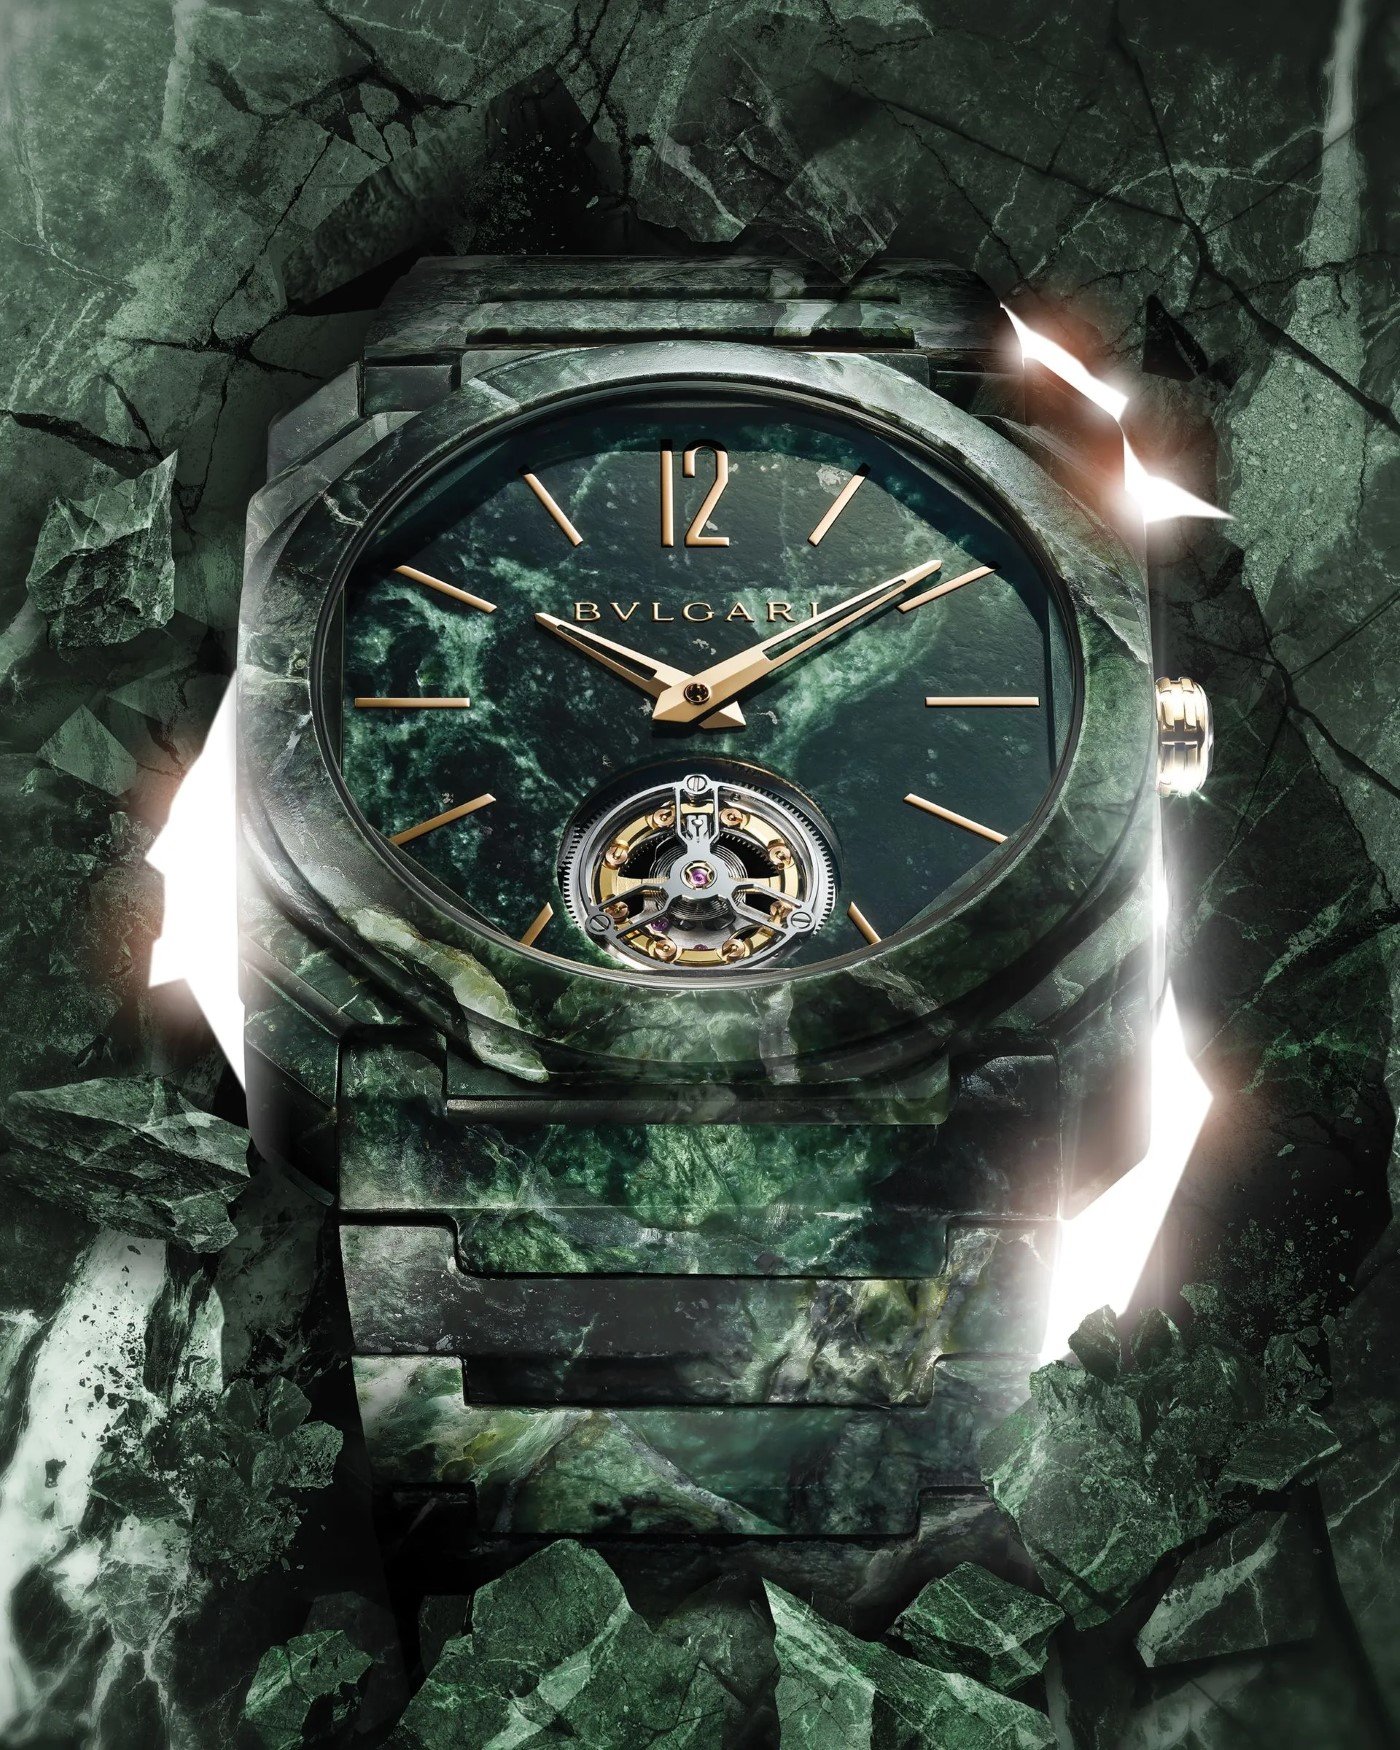 BULGARI Octo Finissimo Tourbillon Marble rend hommage à Only Watch 2023